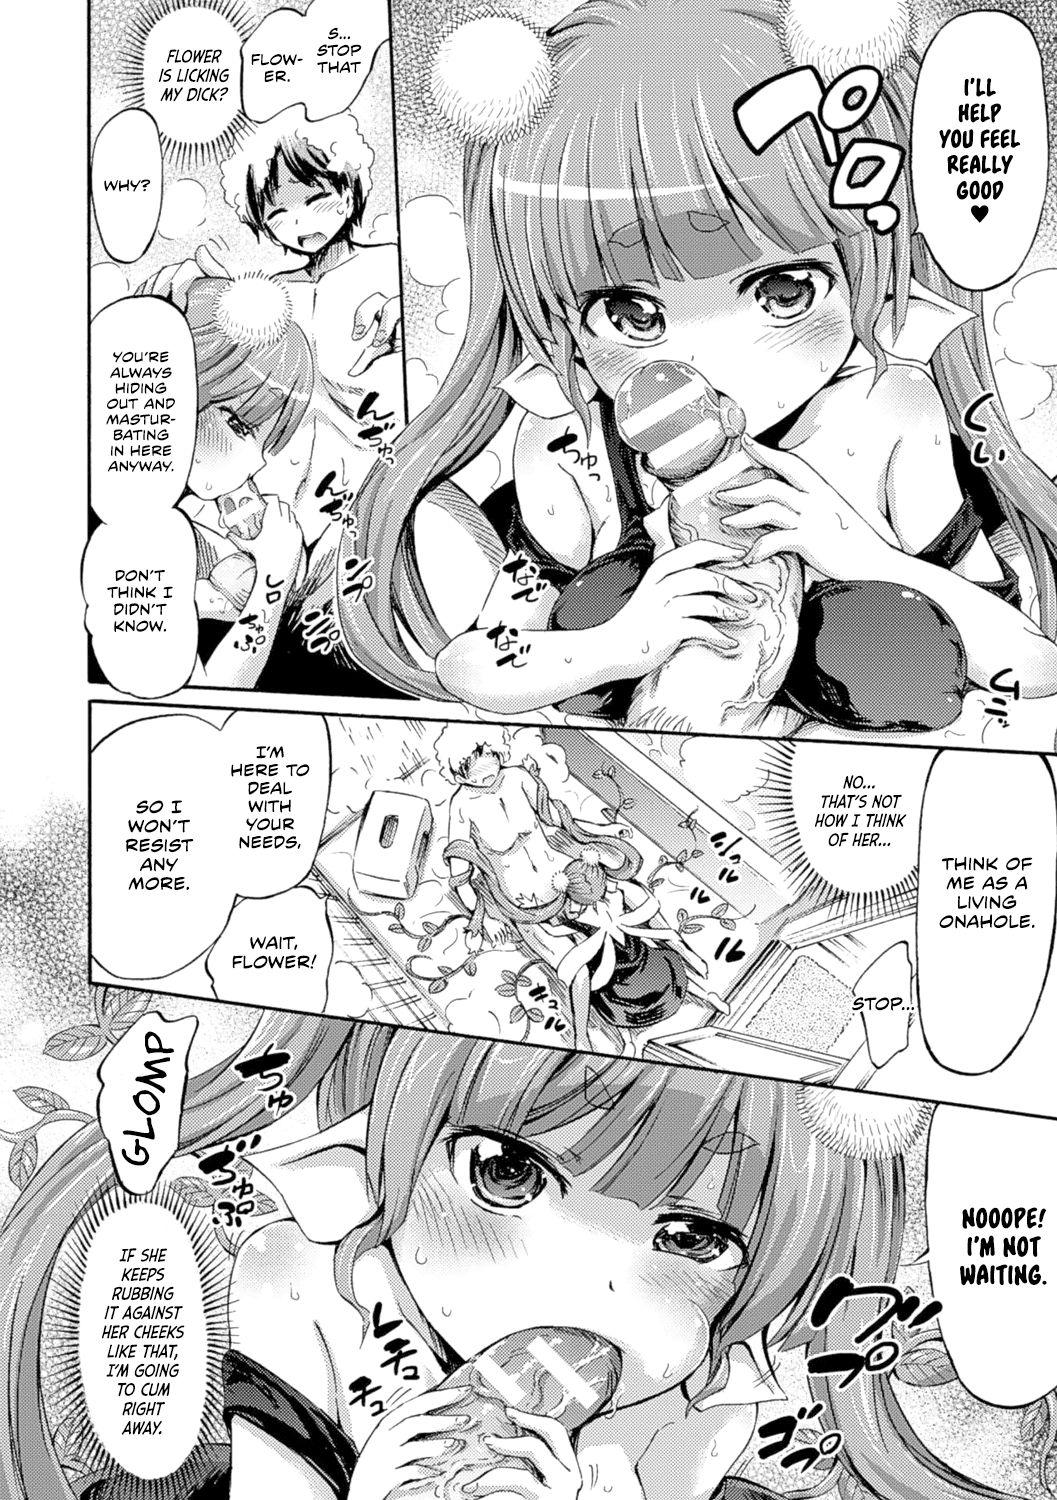 Skinny Hachi no Ue no Flower | Potted Flower Cuckolding - Page 10